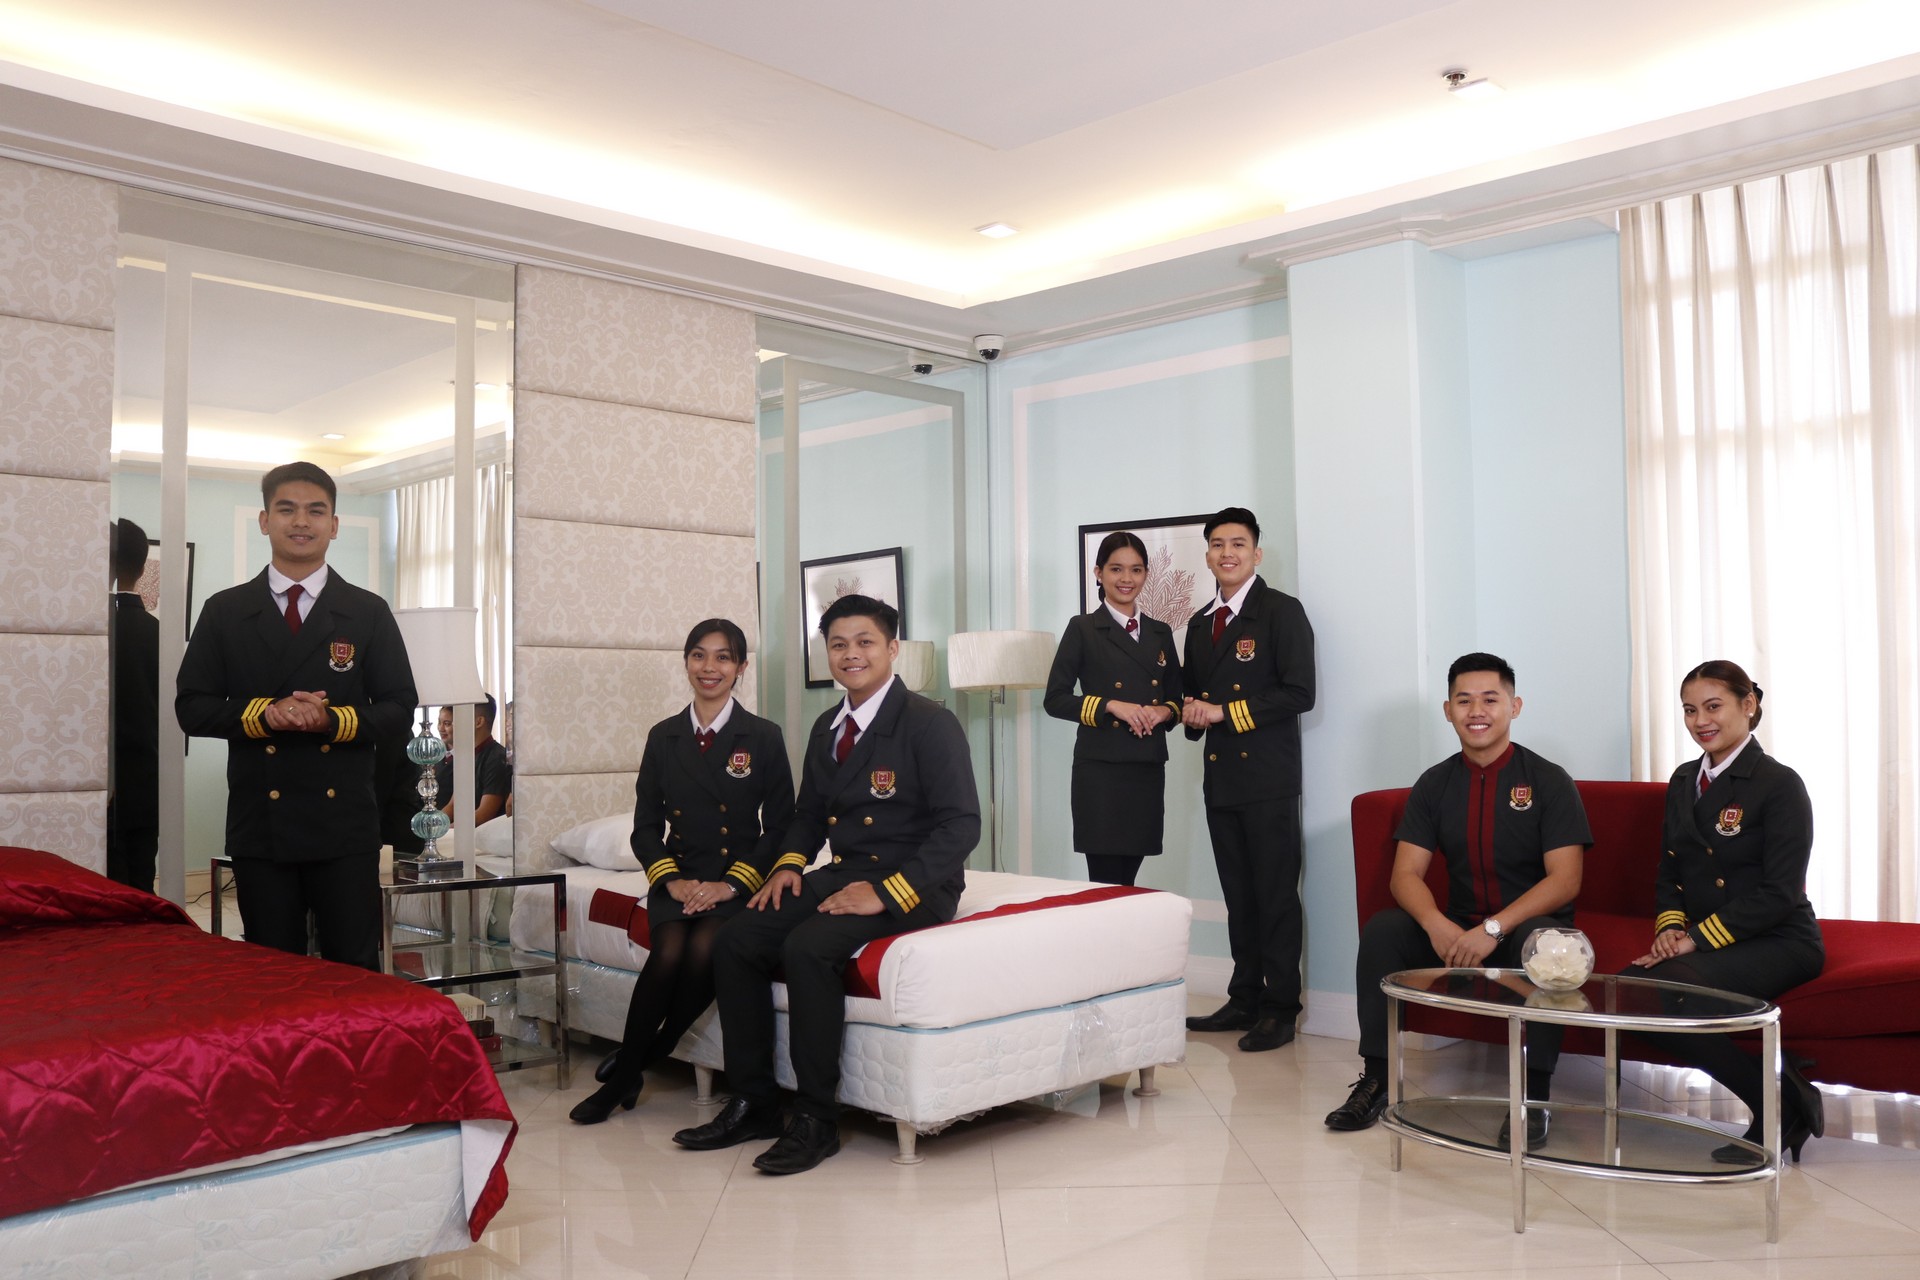 hotel administration in cruise line operations